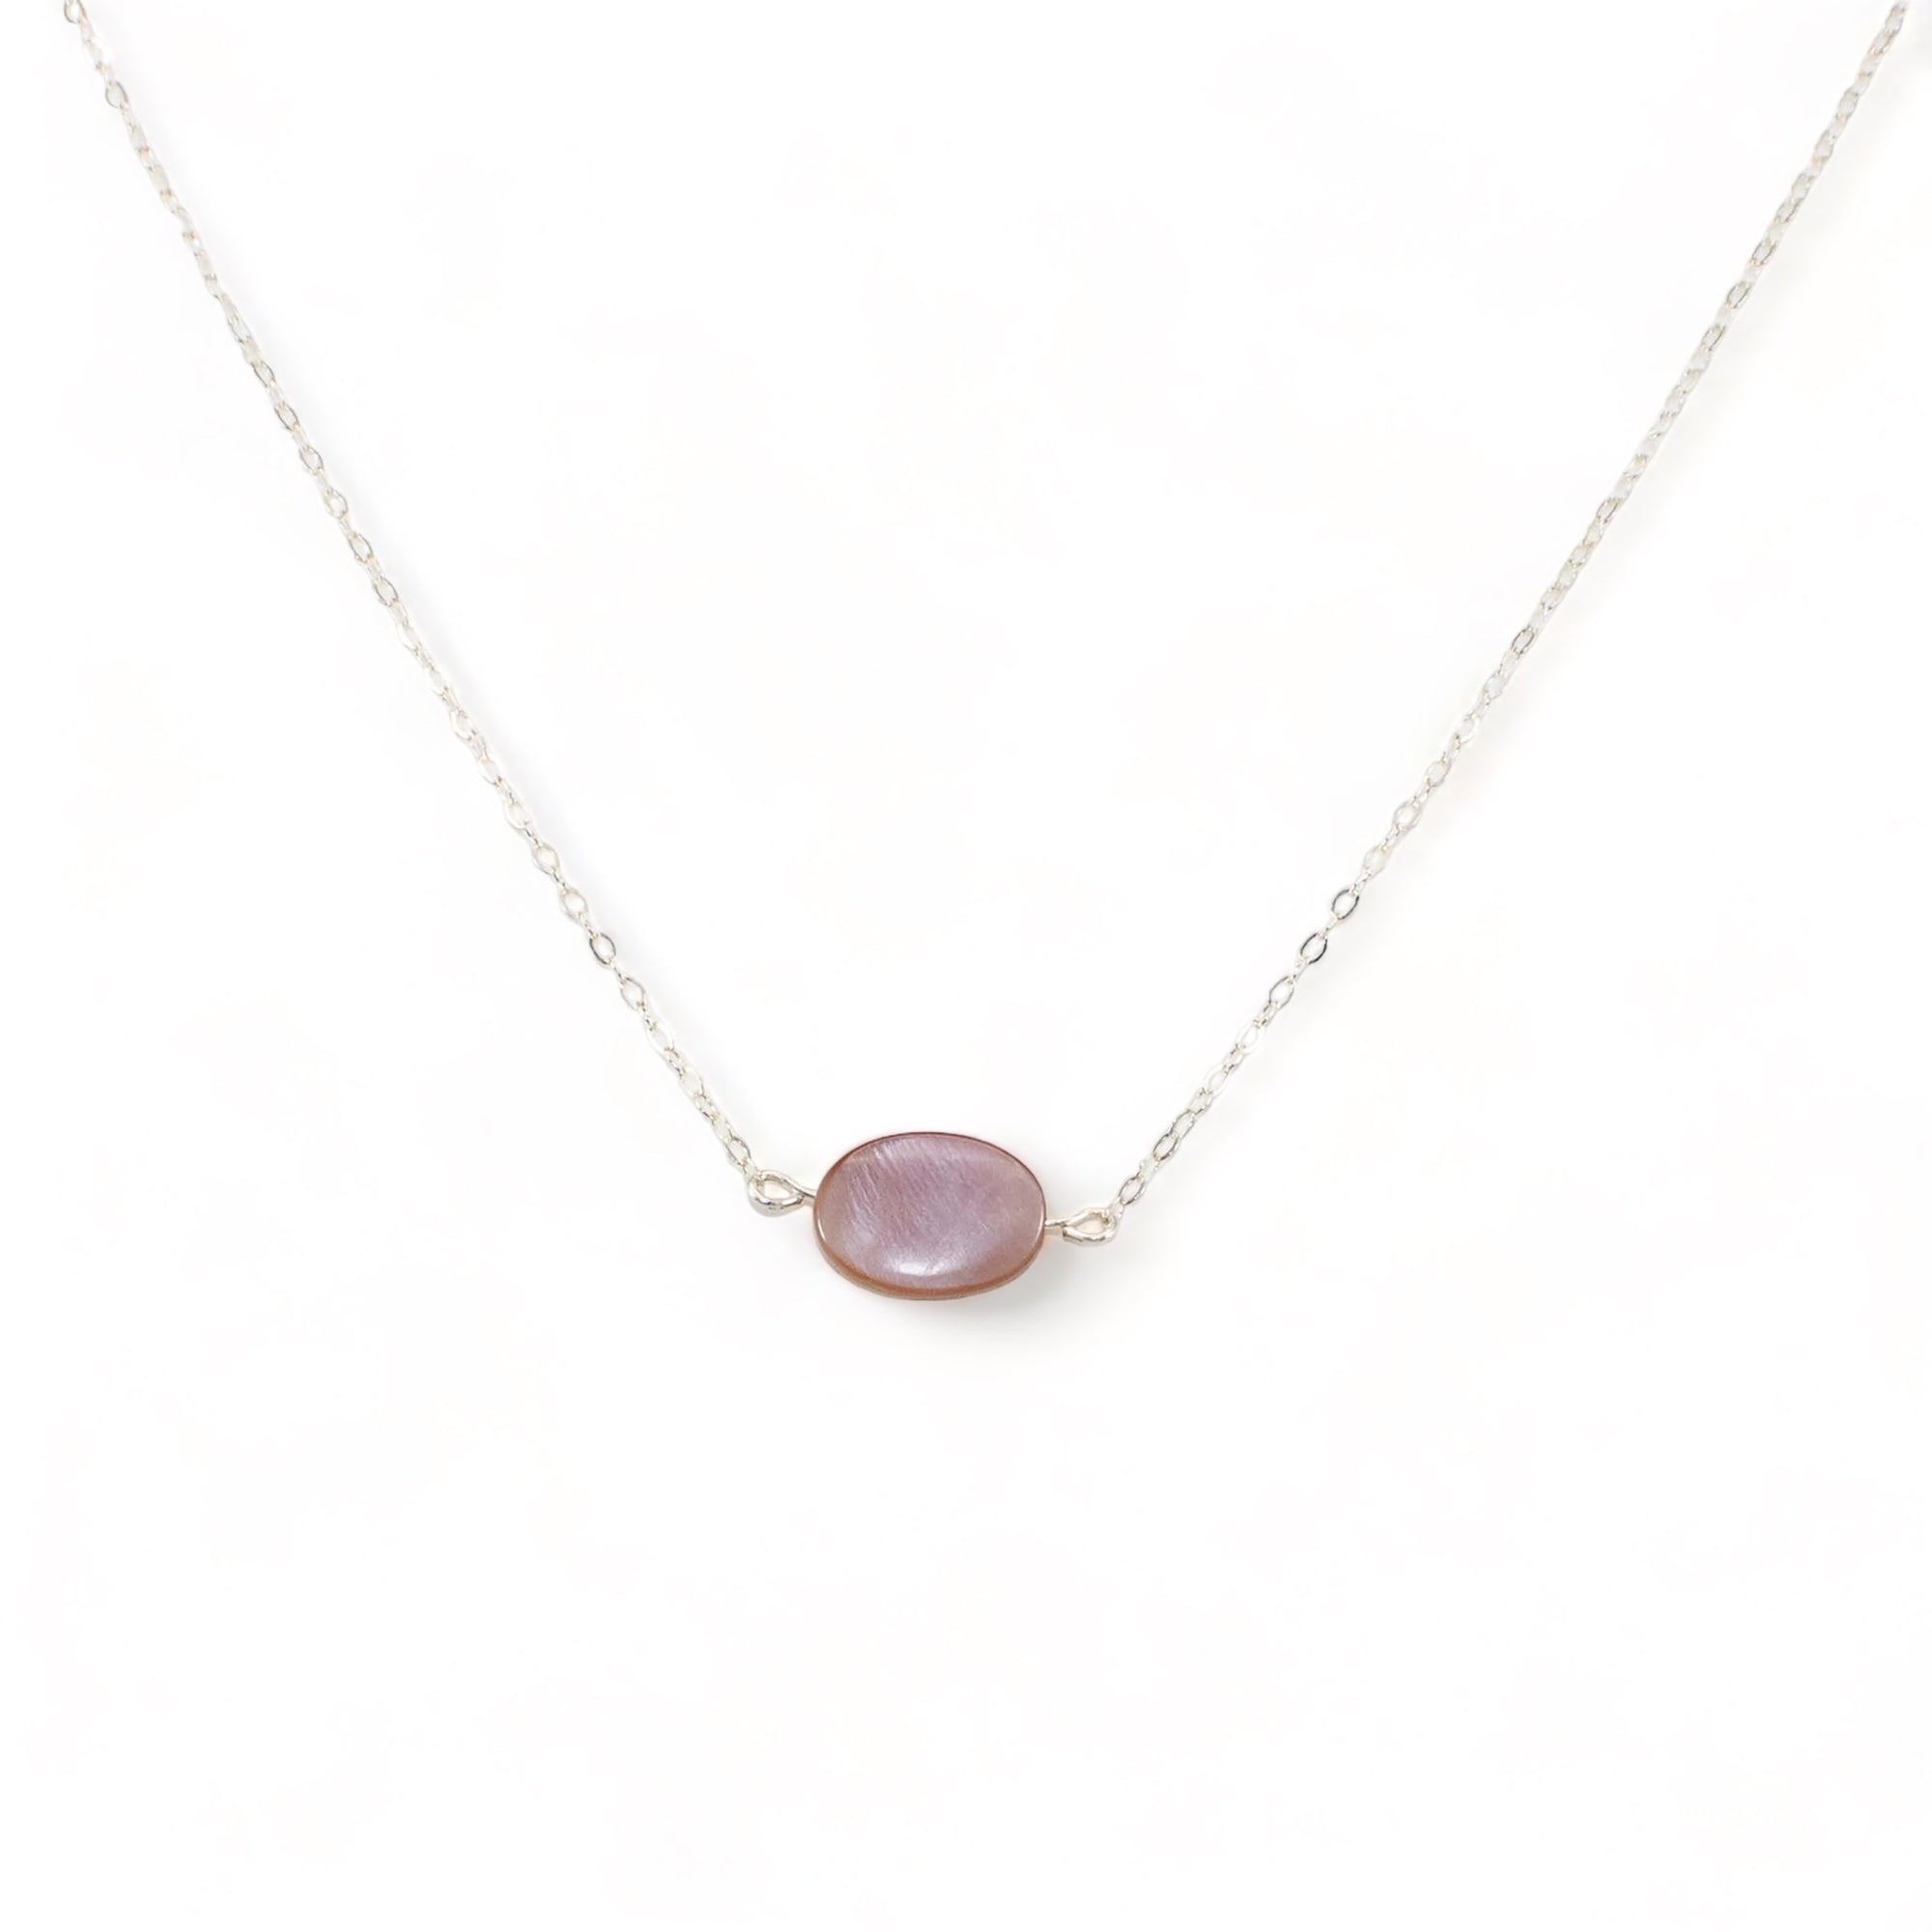 Mauve Mother of Pearl Choker Necklace